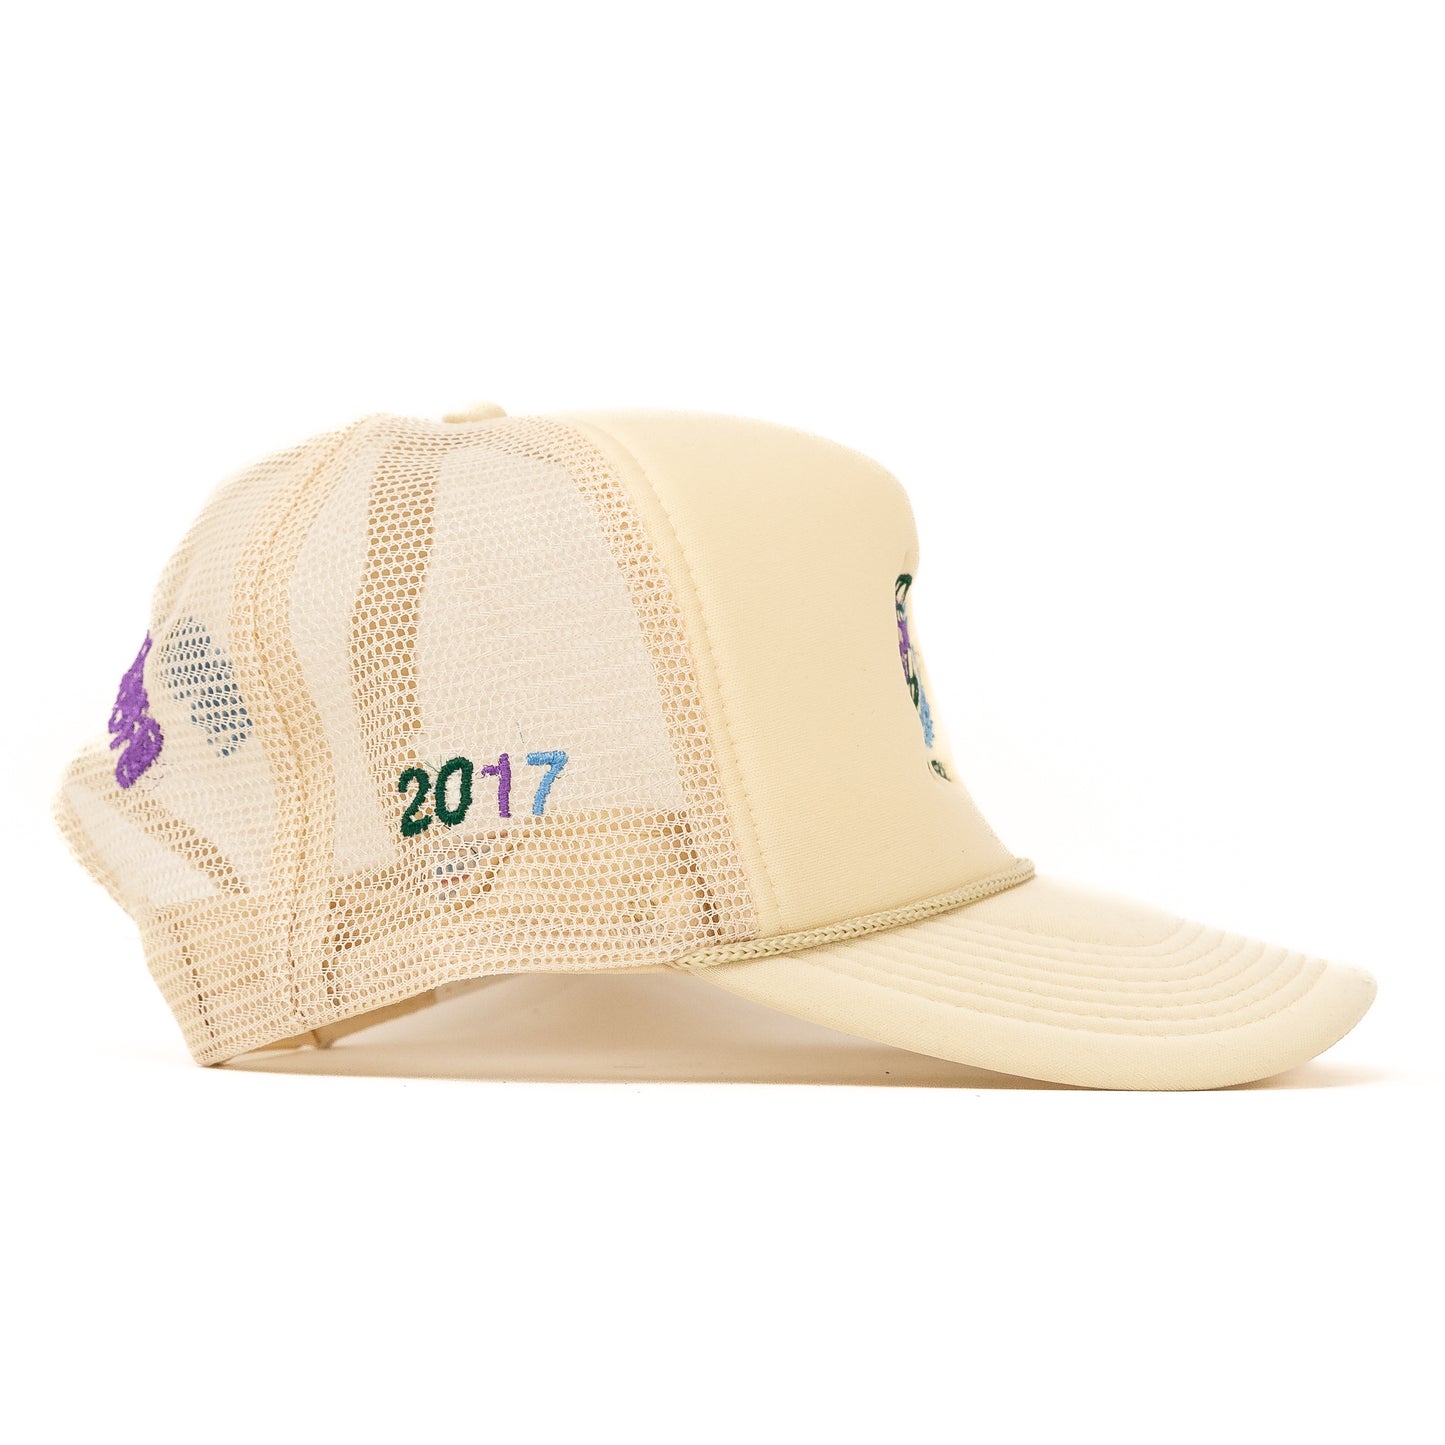 Global Duck Trucker Hat, Ivory - Layr Official